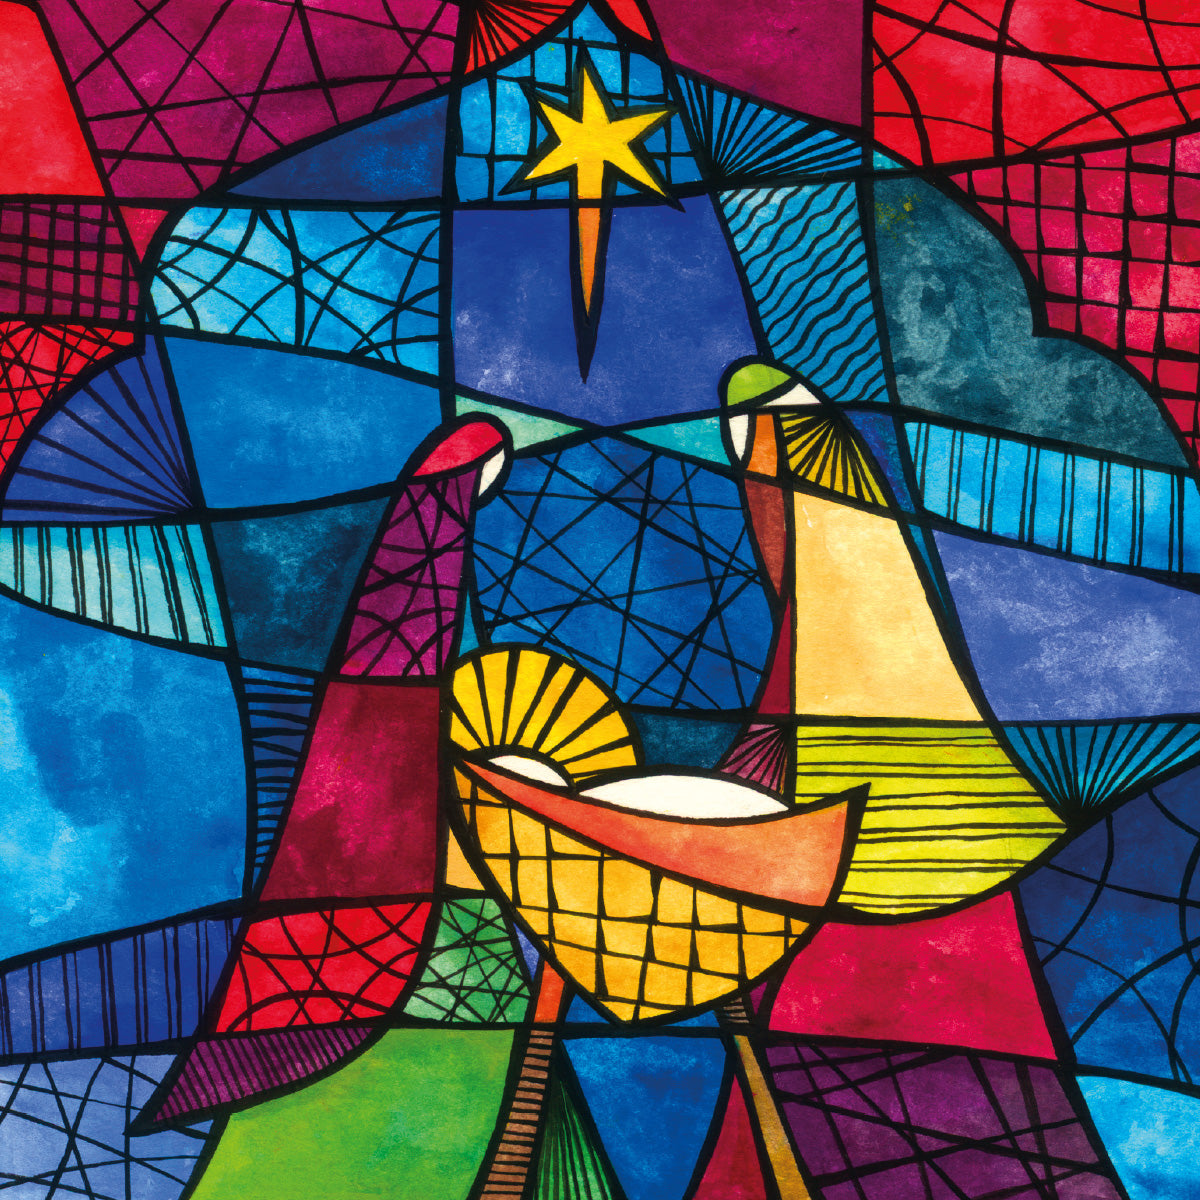 Compassion Christmas Card: Stained Glass (pack of 10) - The Christian Gift Company